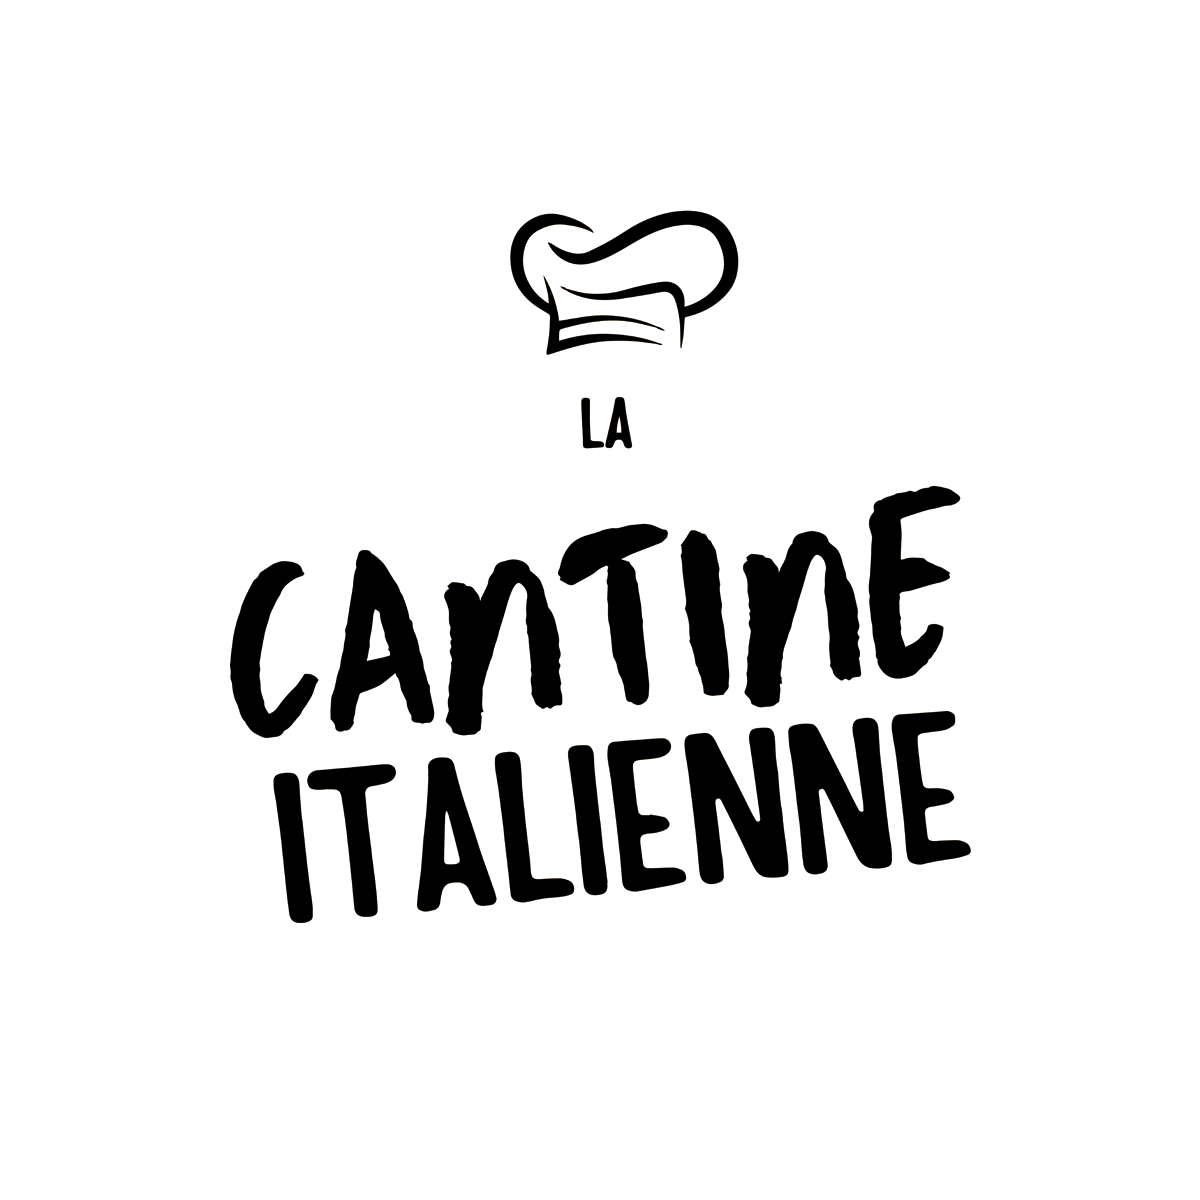 Cantine Italienne